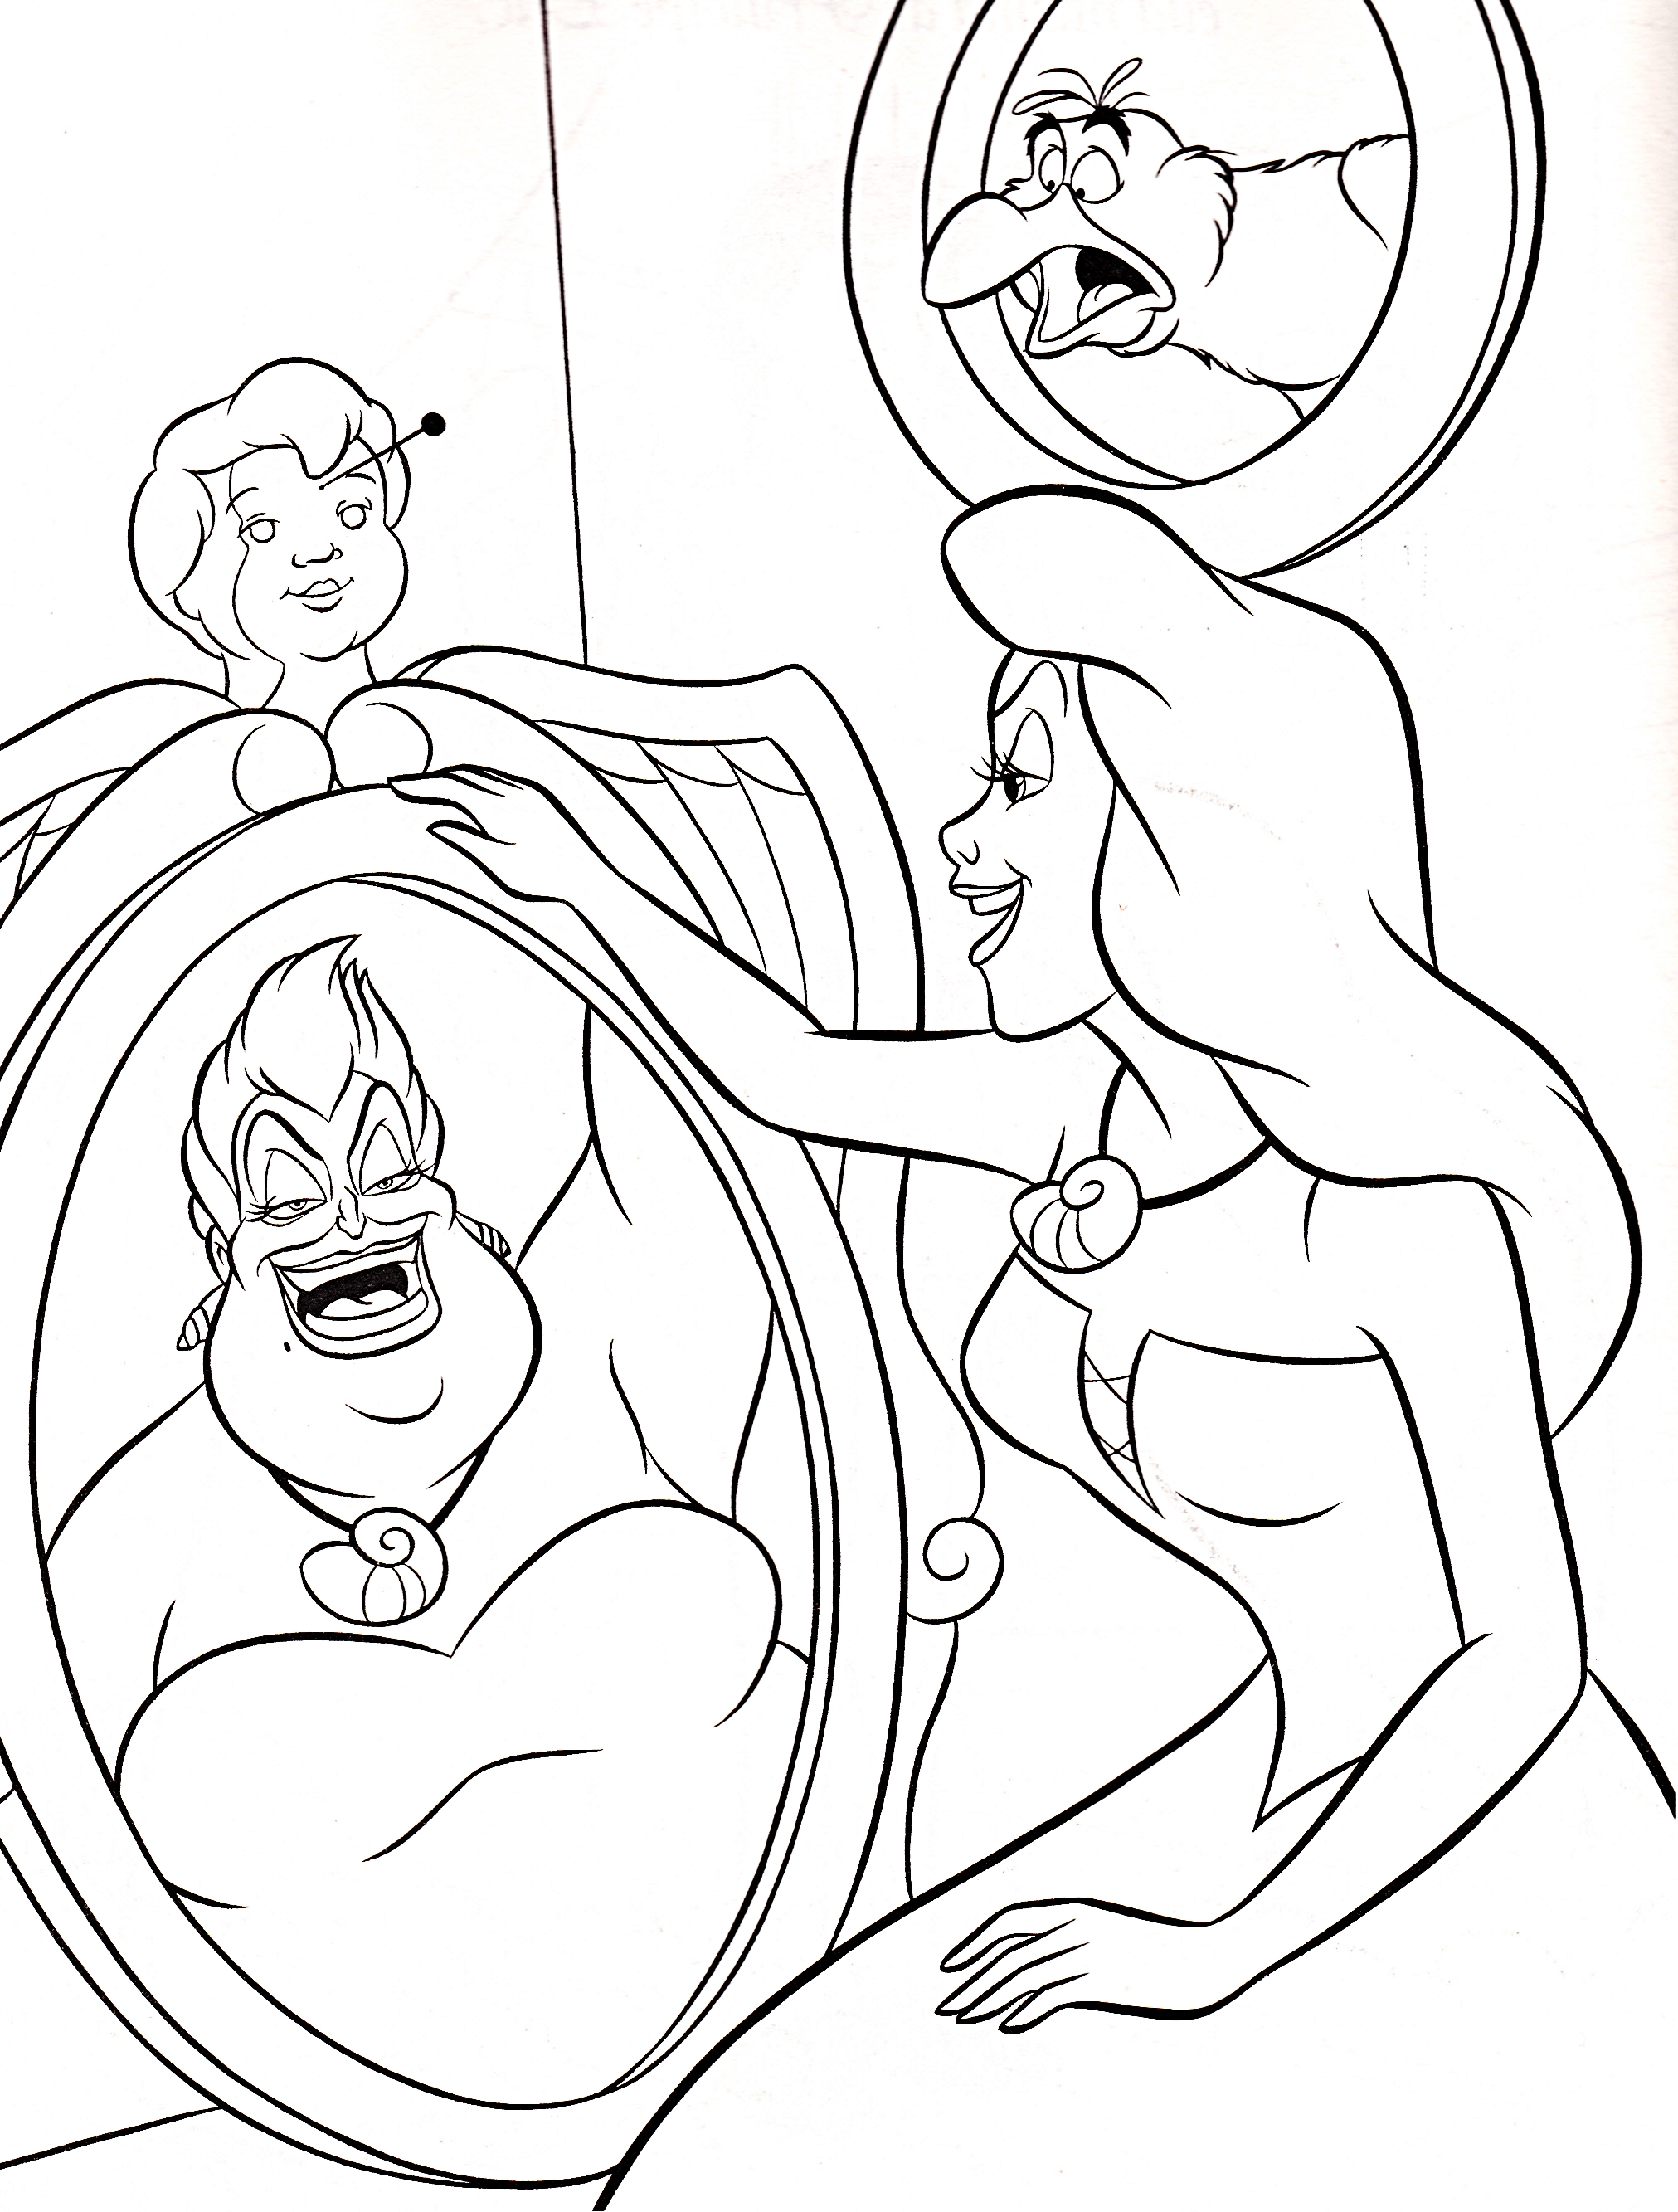 The Beautiful Ursula coloring page